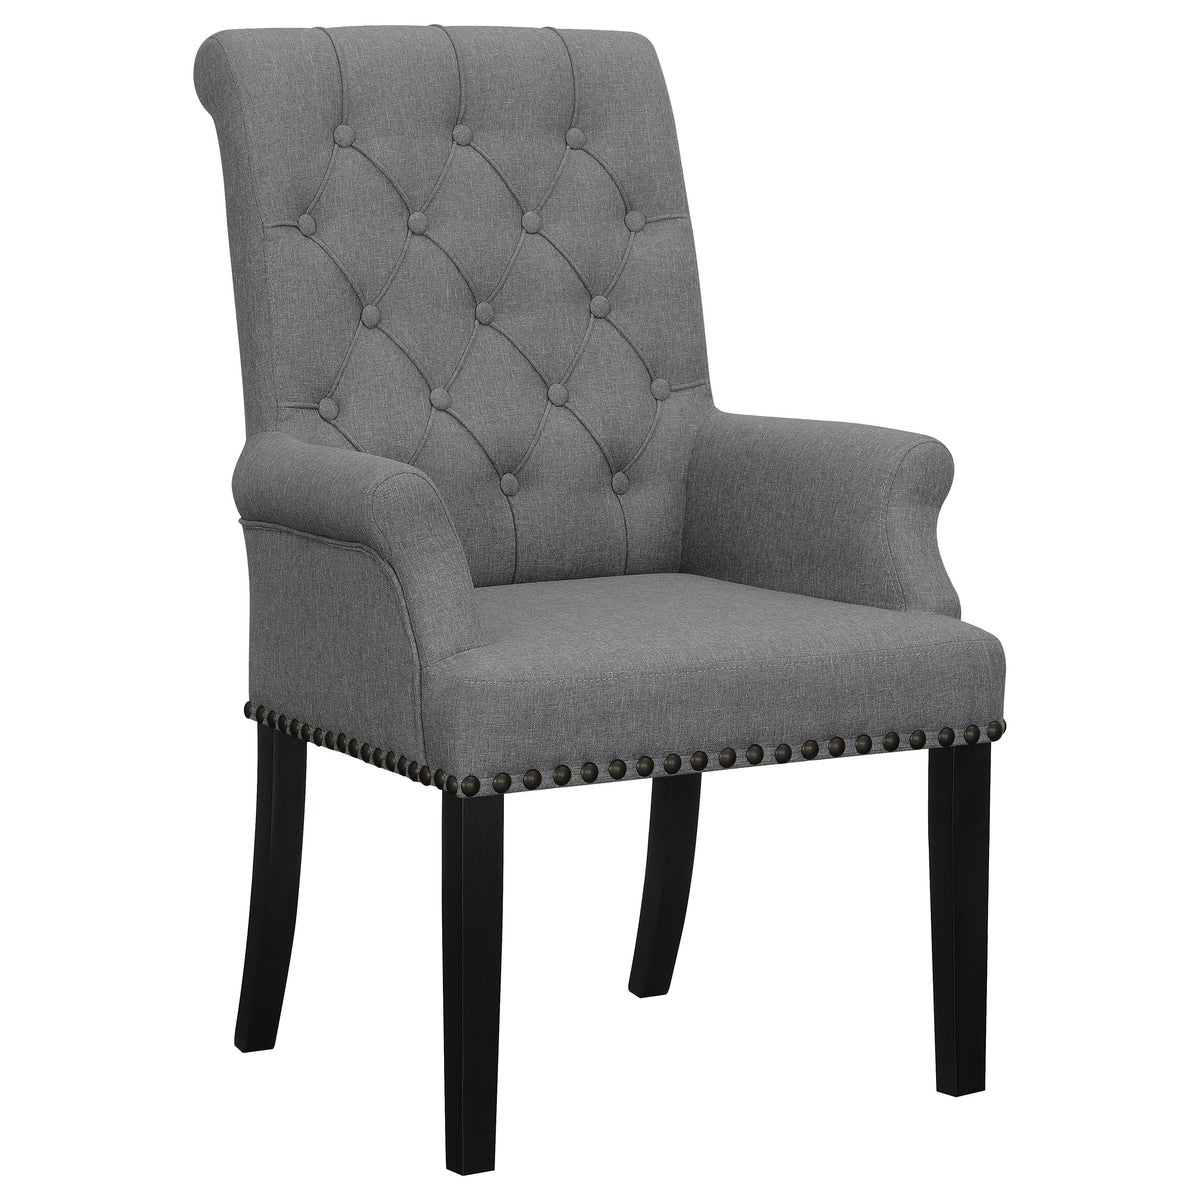 Alana Upholstered Tufted Arm Chair with Nailhead Trim  Las Vegas Furniture Stores